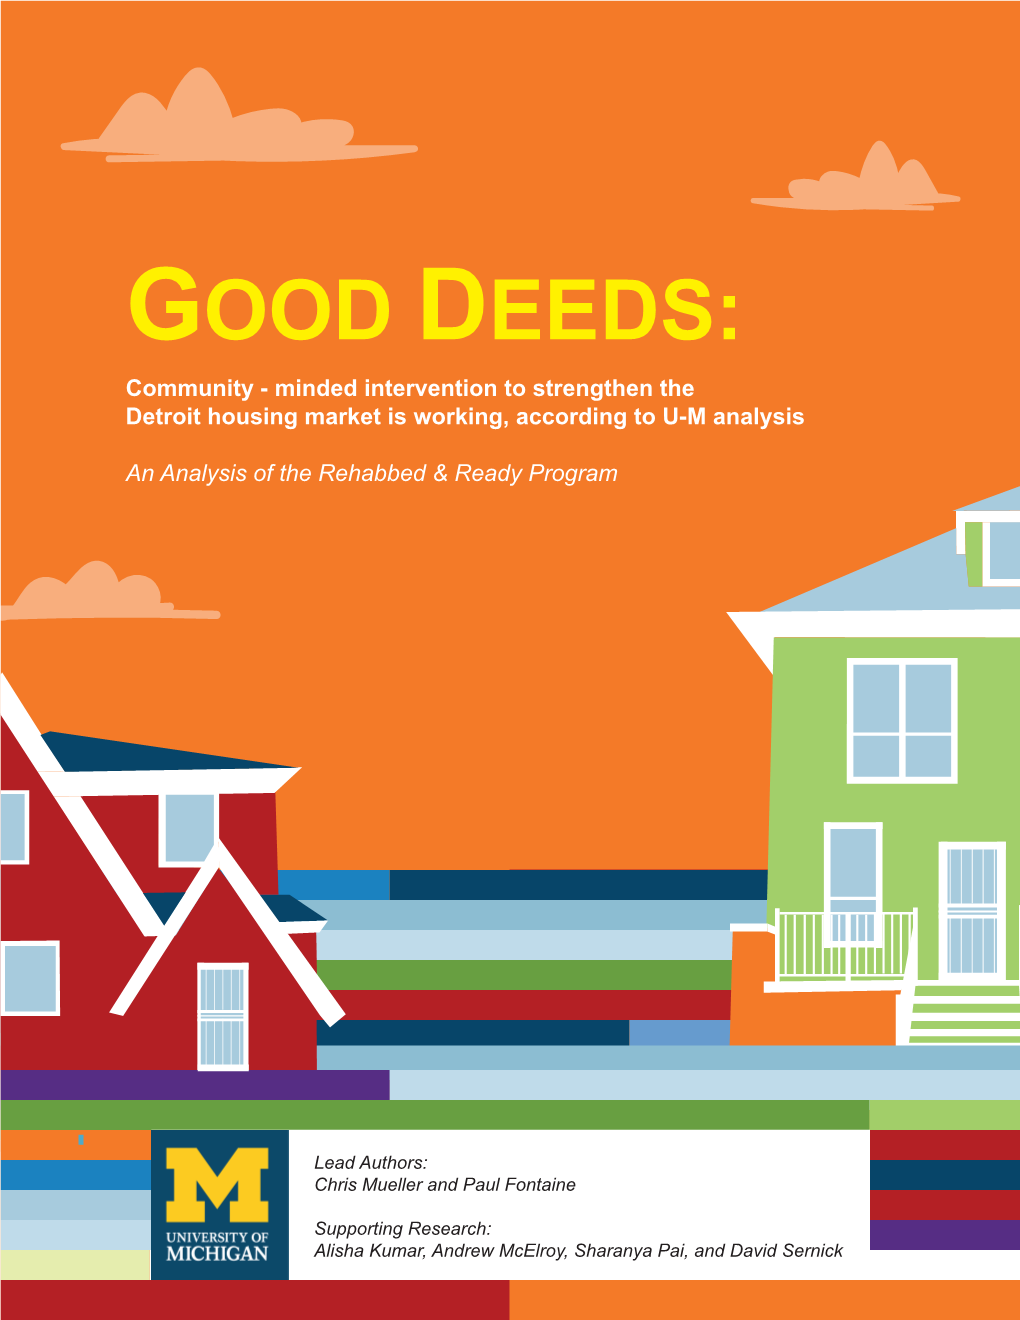 GOOD DEEDS: Community - Minded Intervention to Strengthen the Detroit Housing Market Is Working, According to U-M Analysis